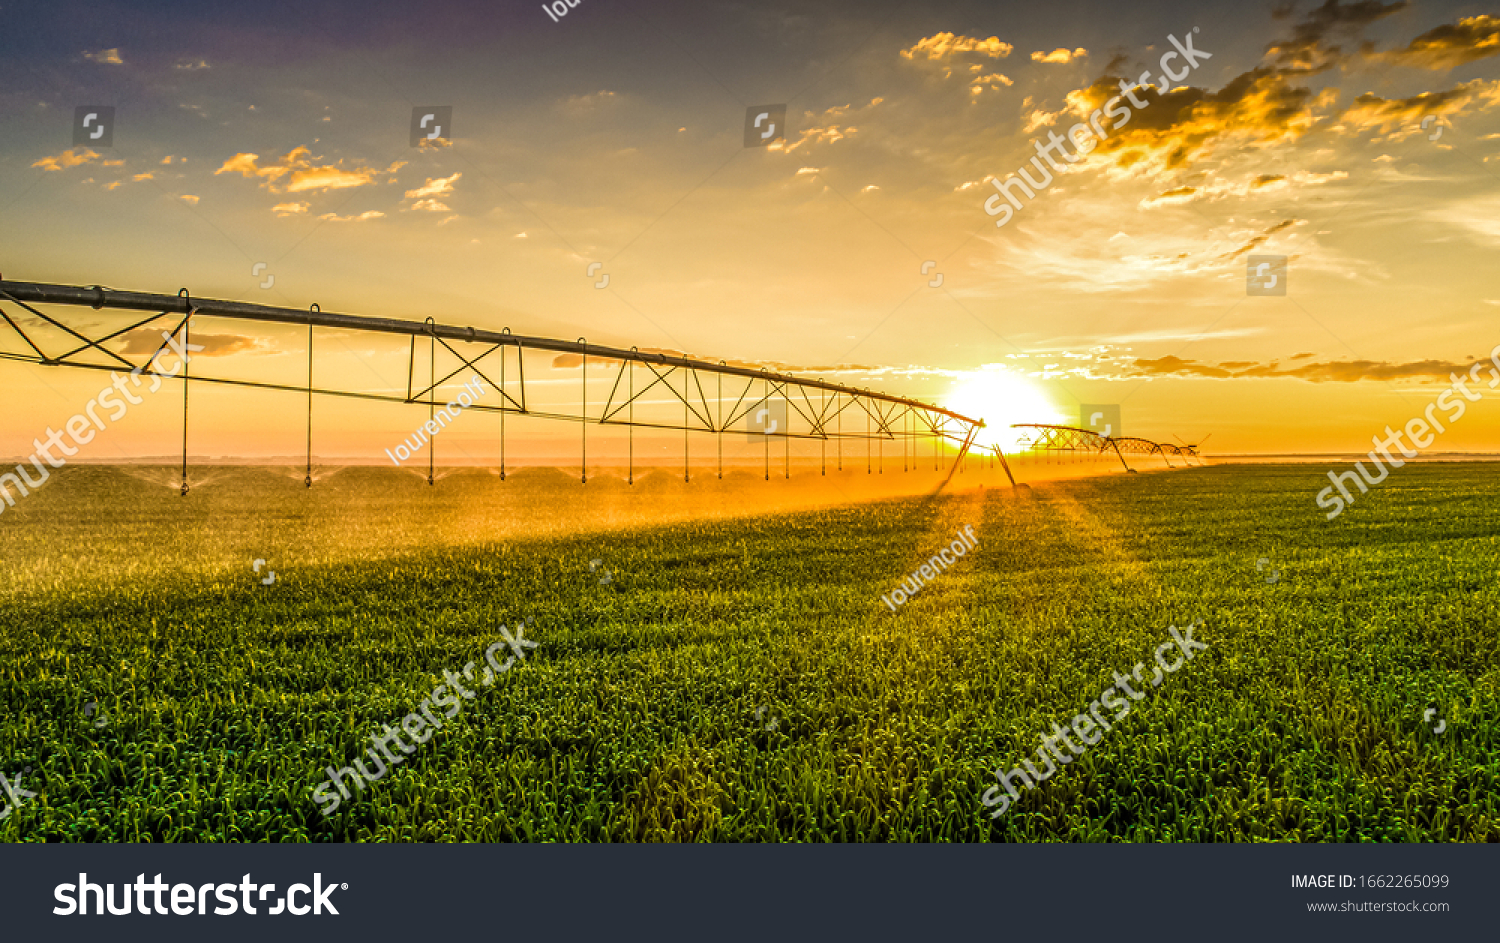 Agriculture - Aerial image, Pivot irrigation used to water plants on a farm. sunset, circular pivot irrigation with drone - Agribusiness #1662265099